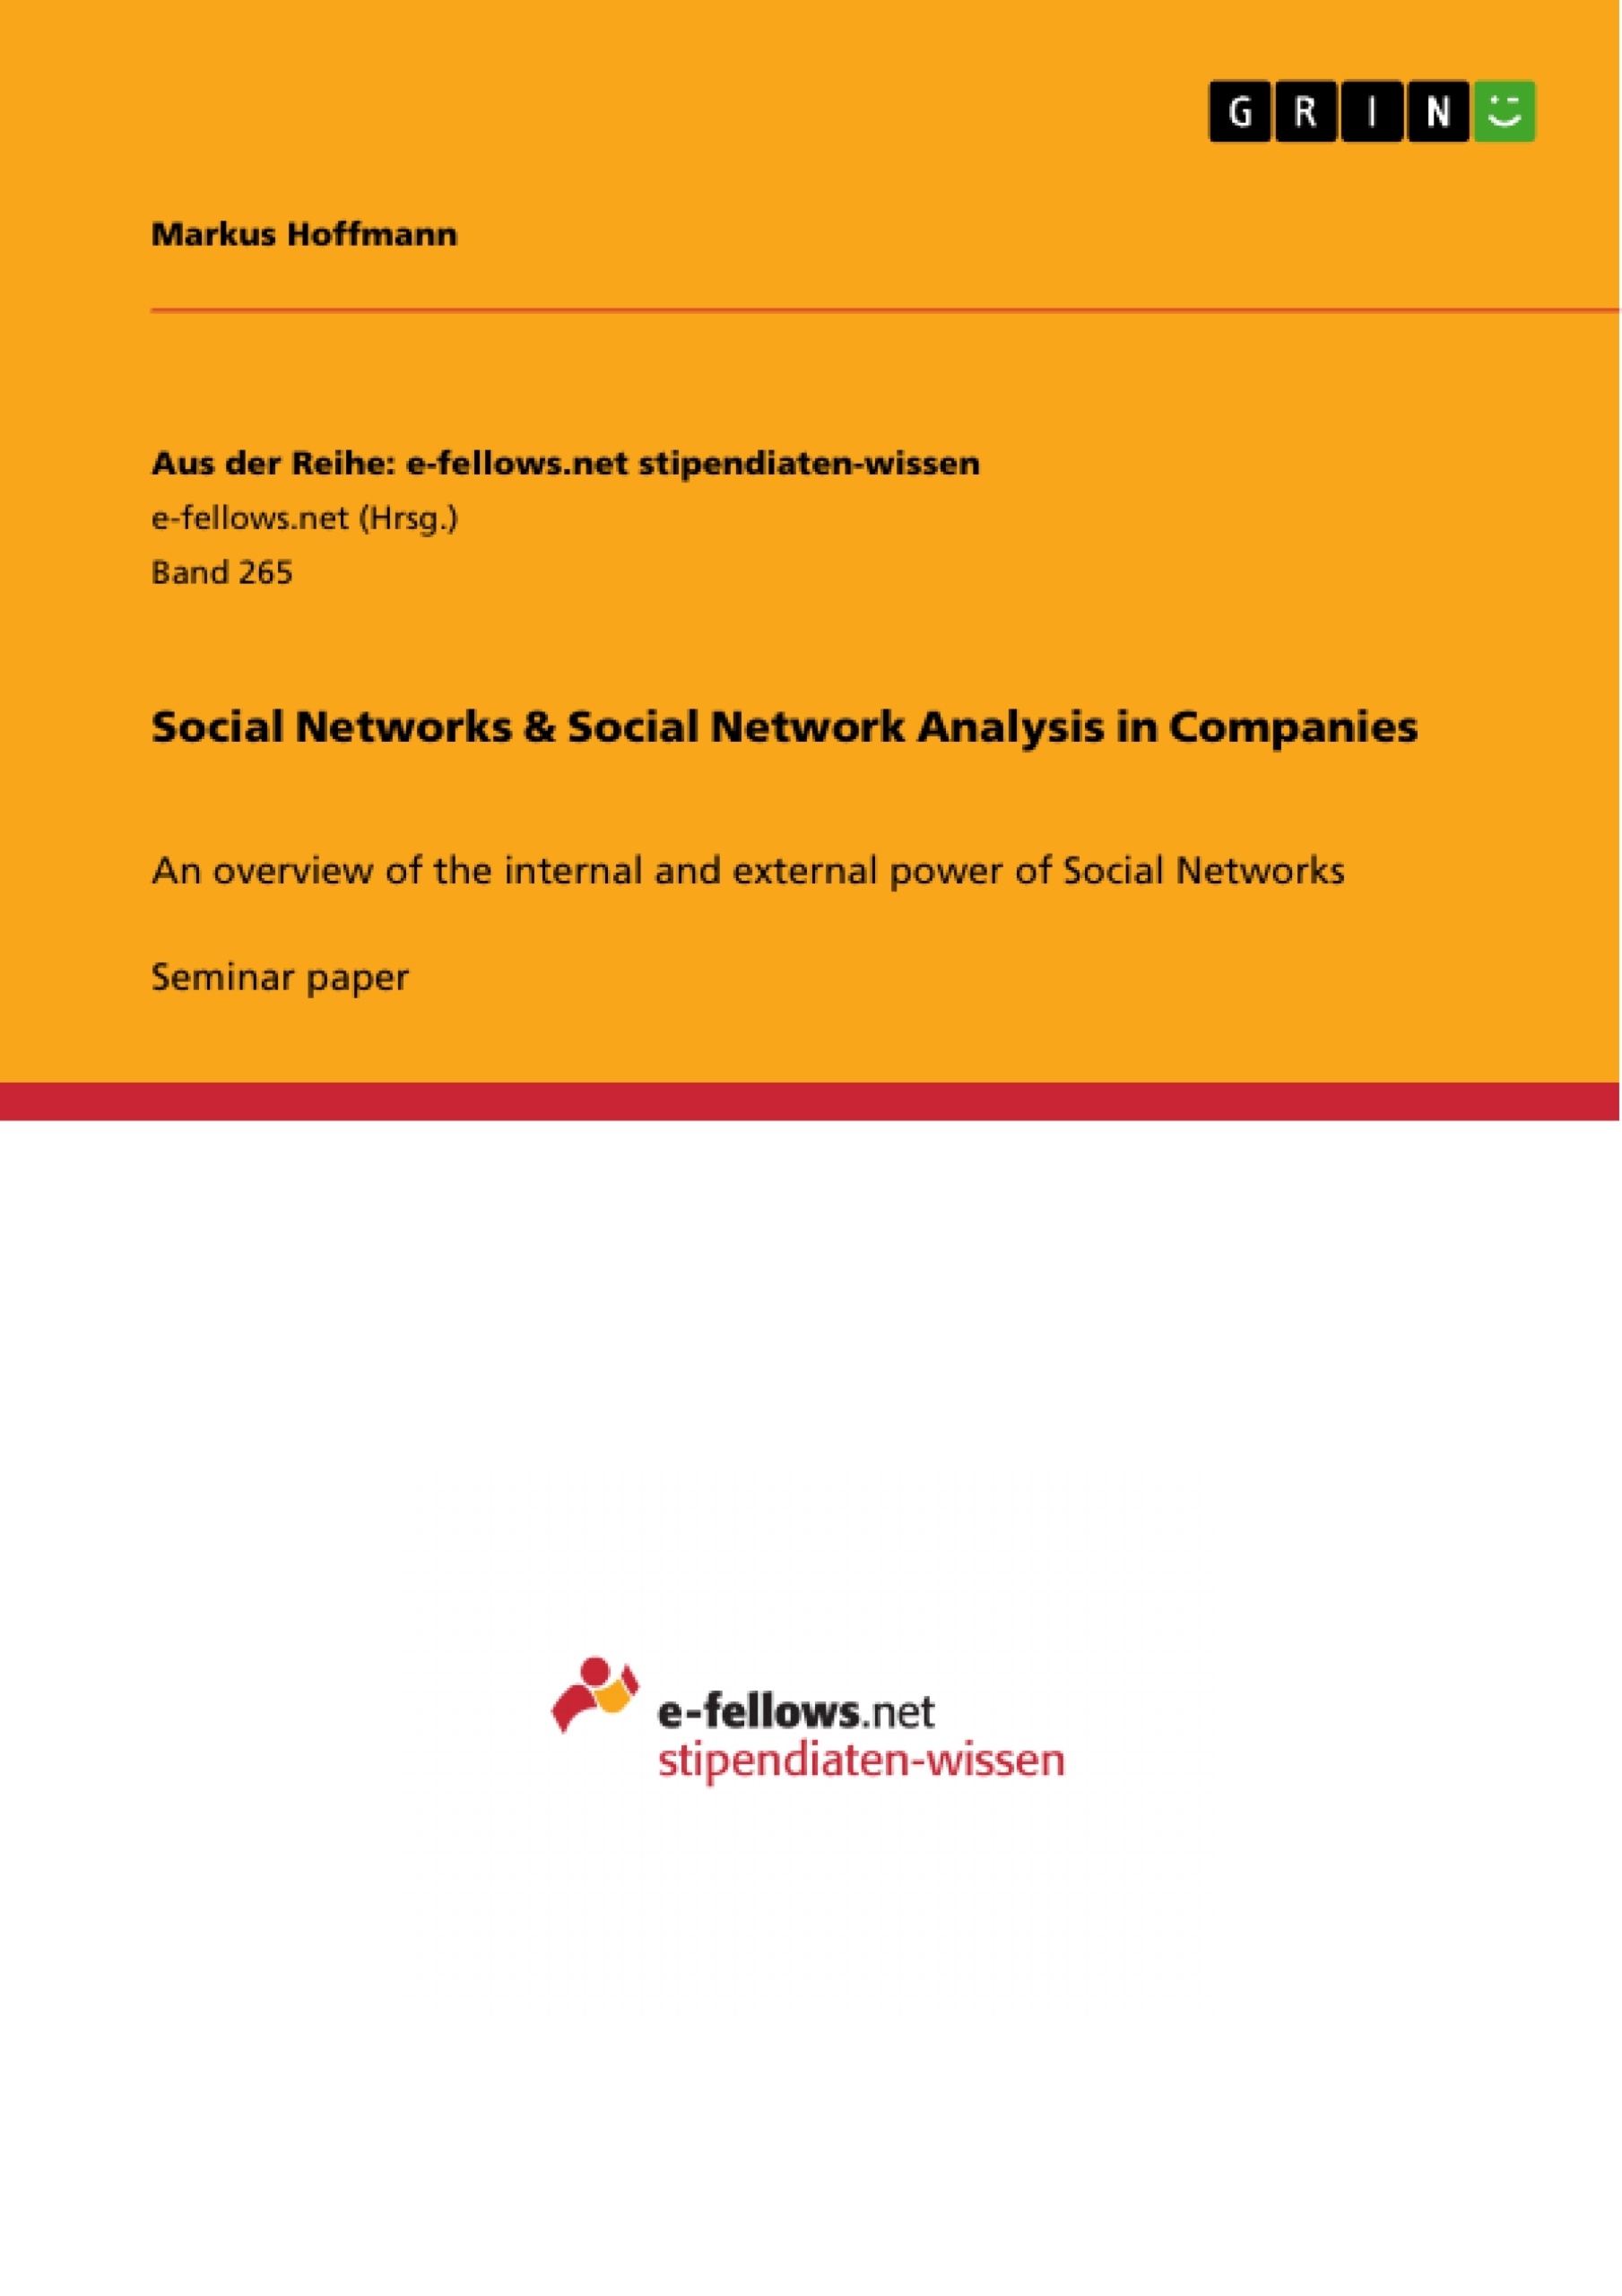 Título: Social Networks & Social Network Analysis in Companies